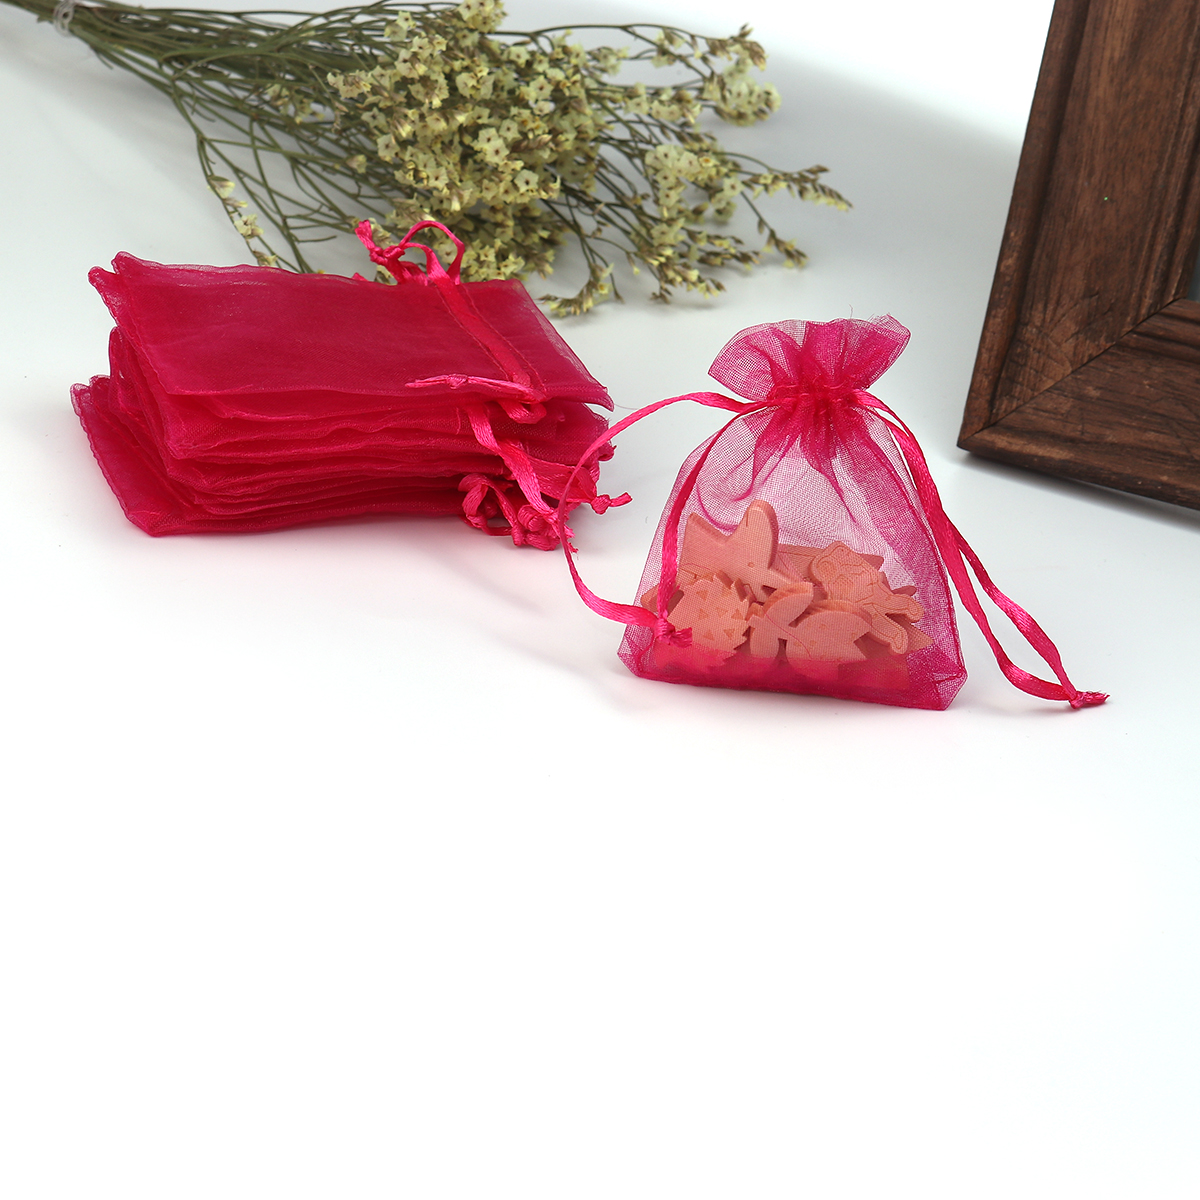 Picture of Wedding Gift Organza Jewelry Bags Drawstring Rectangle Fuchsia (Usable Space: 7x7cm) 9cm(3 4/8") x 7cm(2 6/8"), 50 PCs